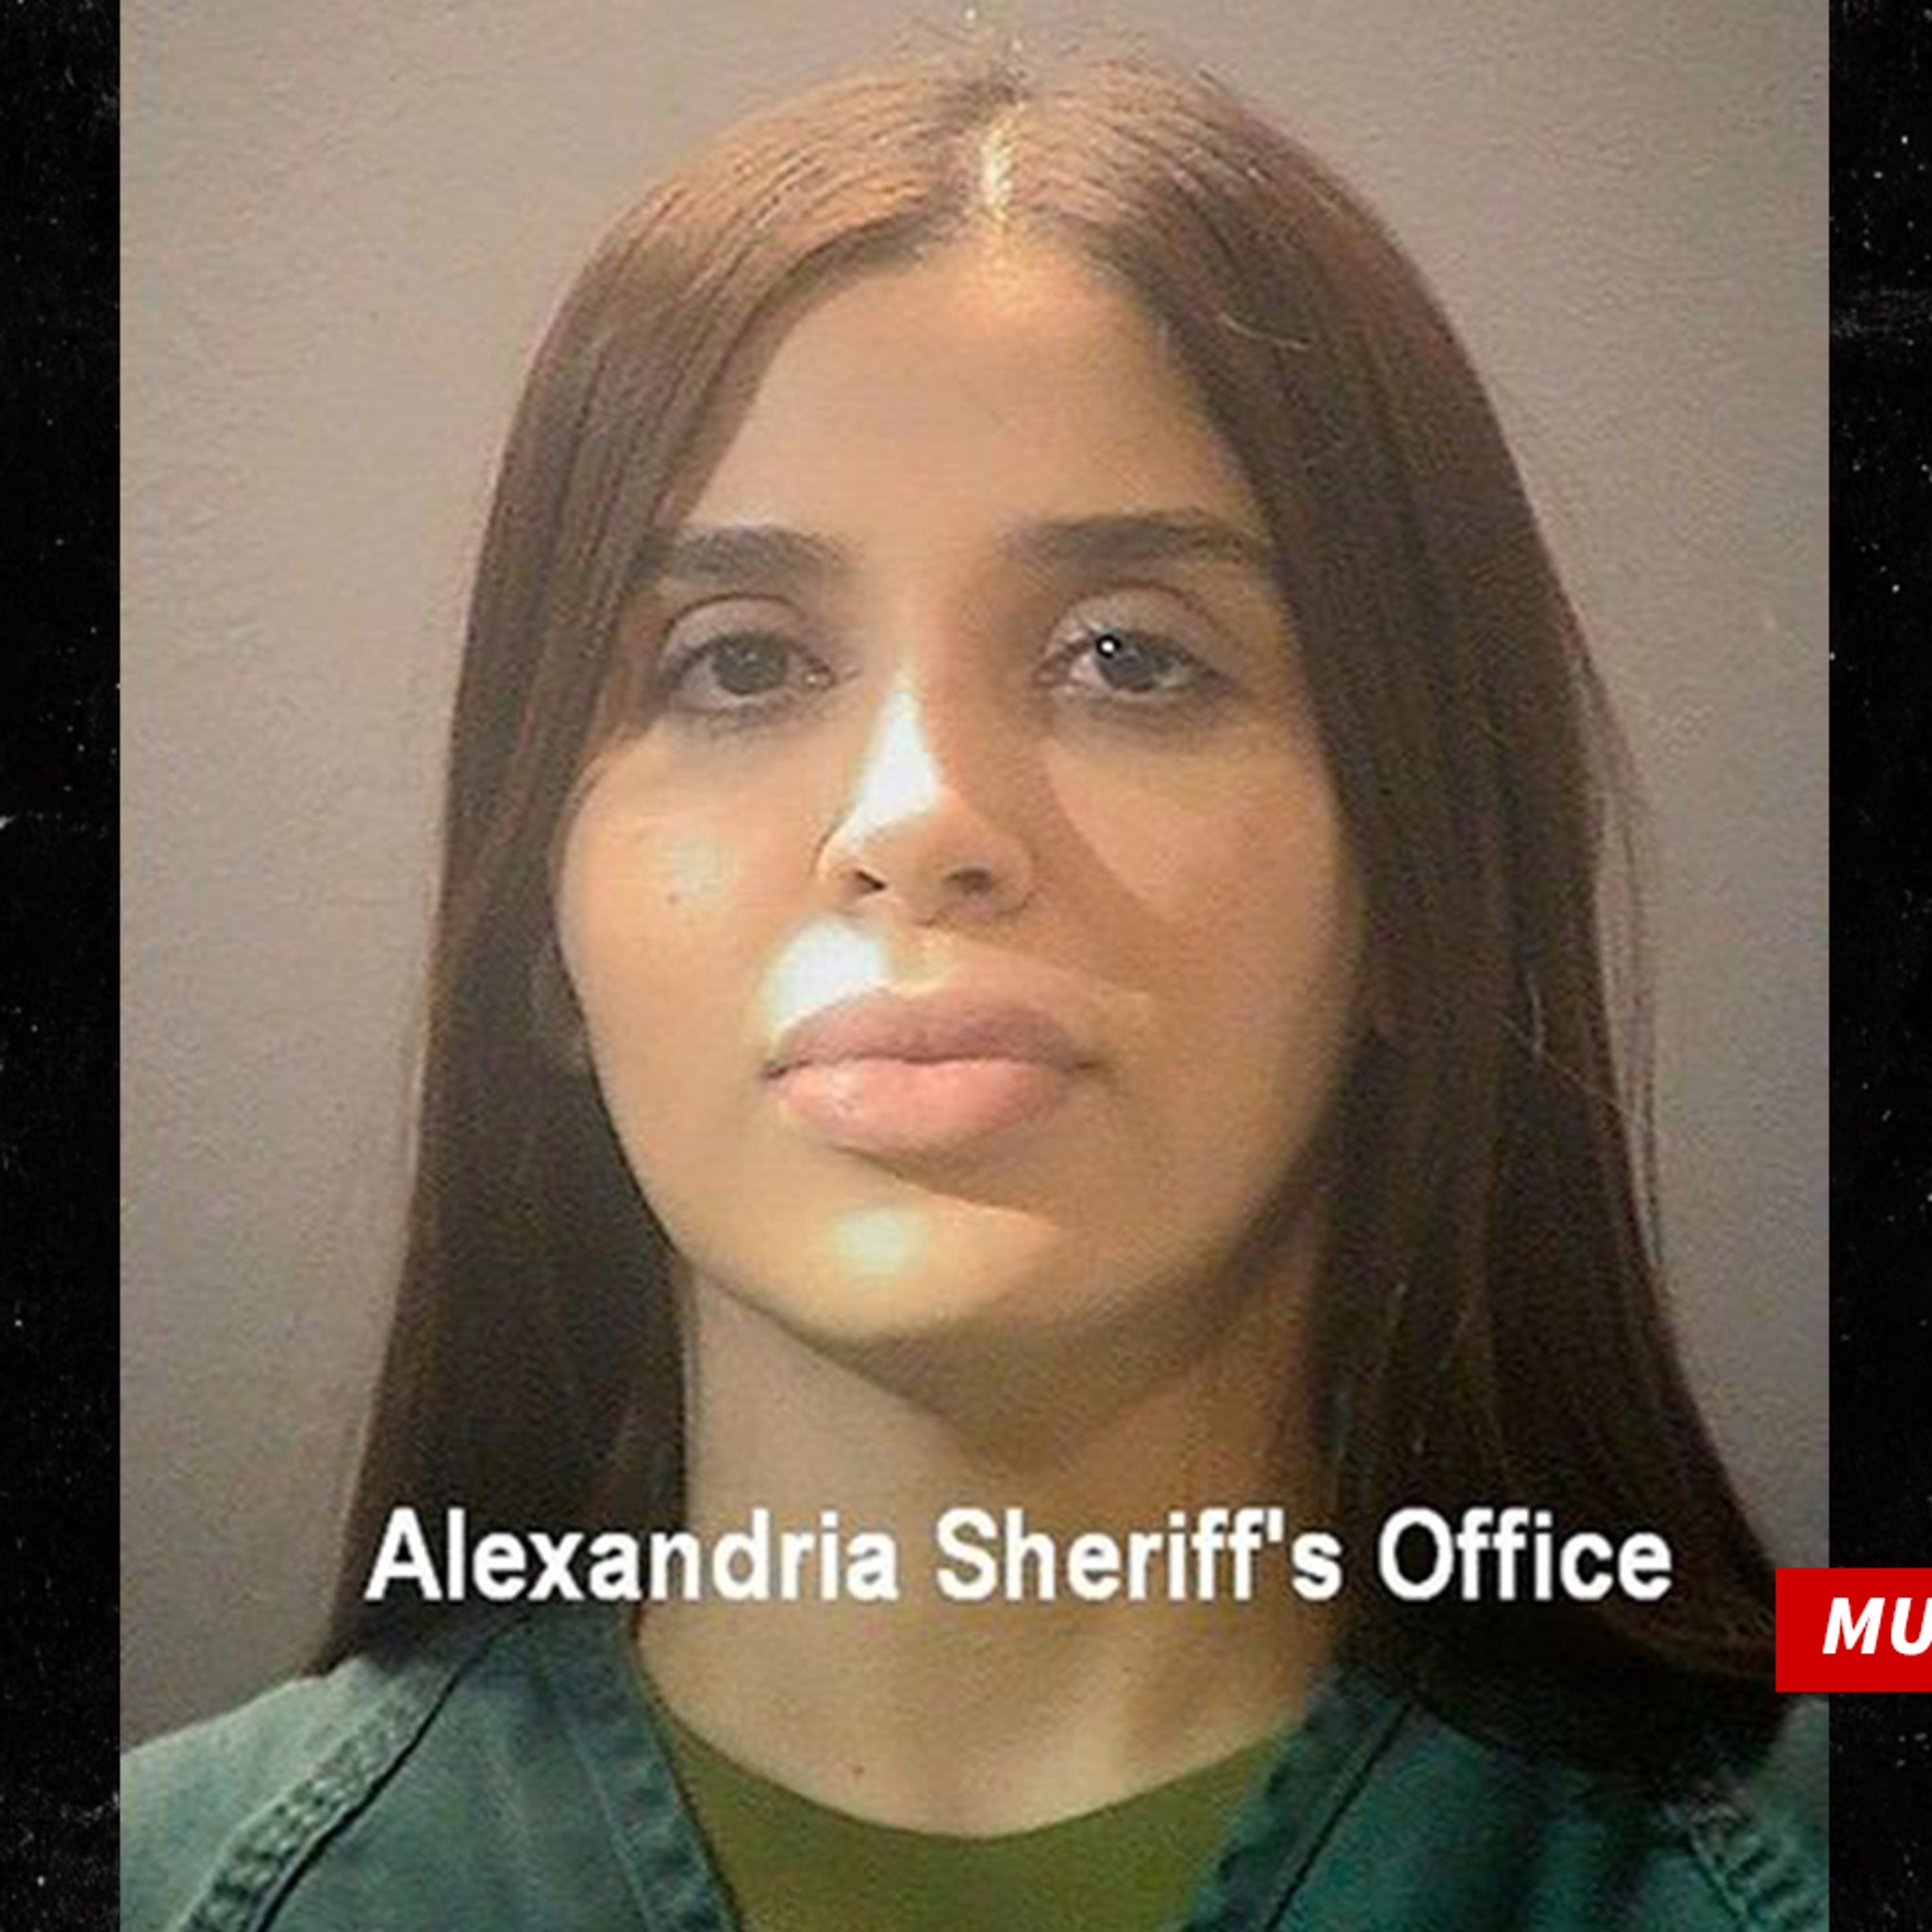 El Chapos Wife Arrested for Drug Trafficking, Held Without Bond photo